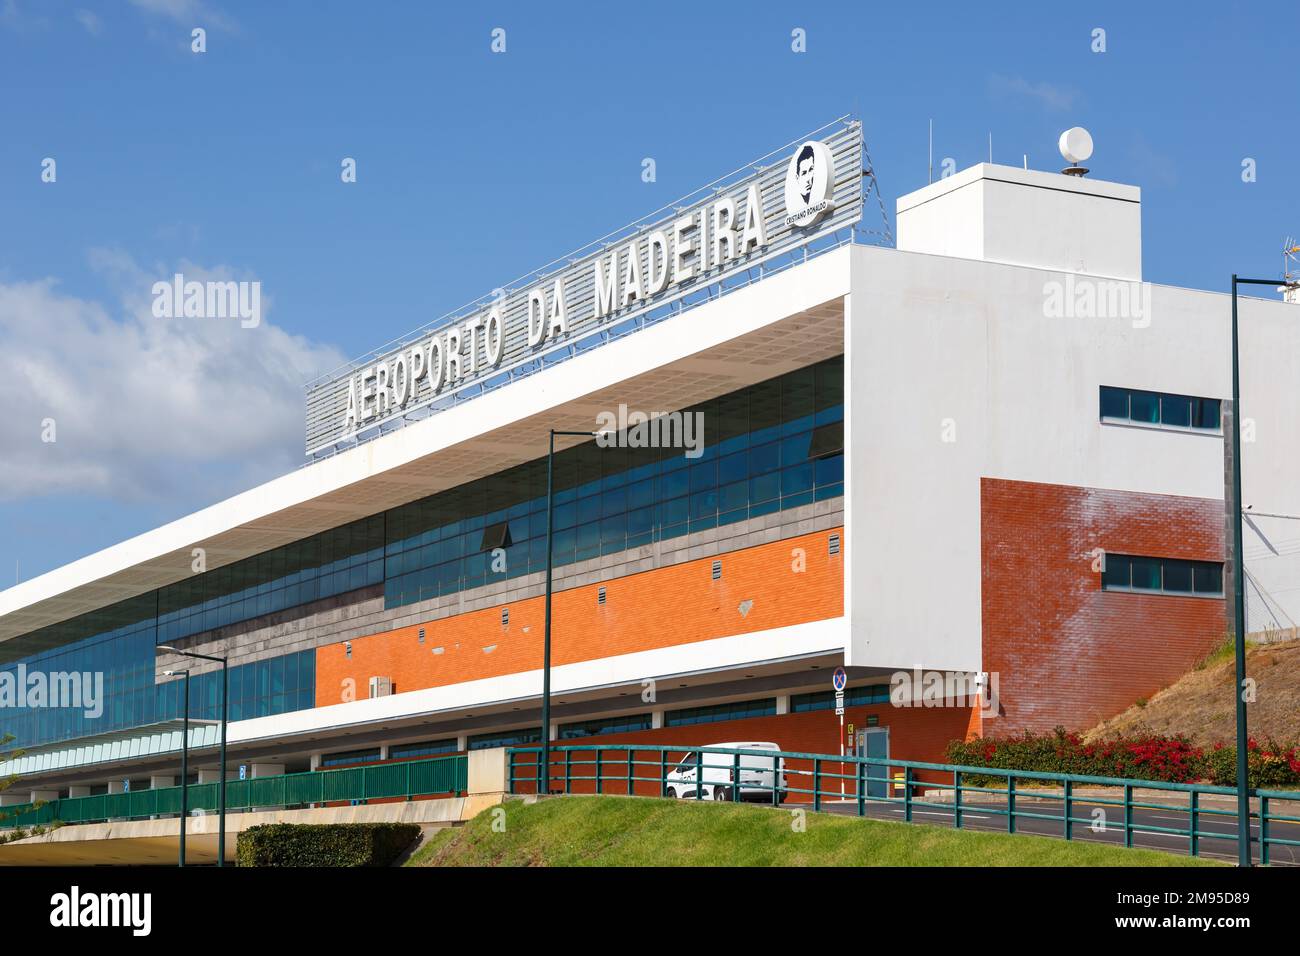 Funchal, Portugal - September 16, 2022: Terminal of Funchal Madeira Cristiano Ronaldo Airport (FNC) in Portugal. Stock Photo